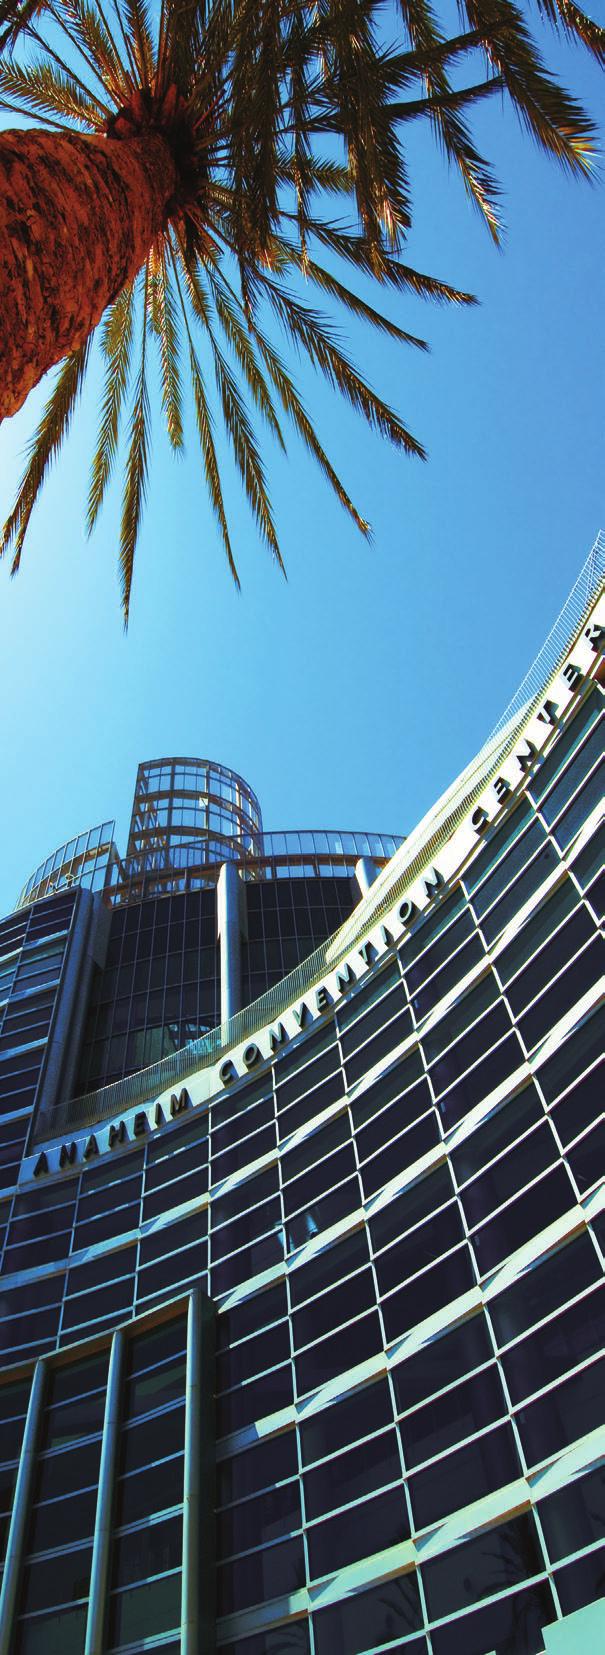 Two Facilities to Serve the NAMM Show Business Center Located Inside the Anaheim Convention Center Full-Production Facility located nearby, operating 24/7.